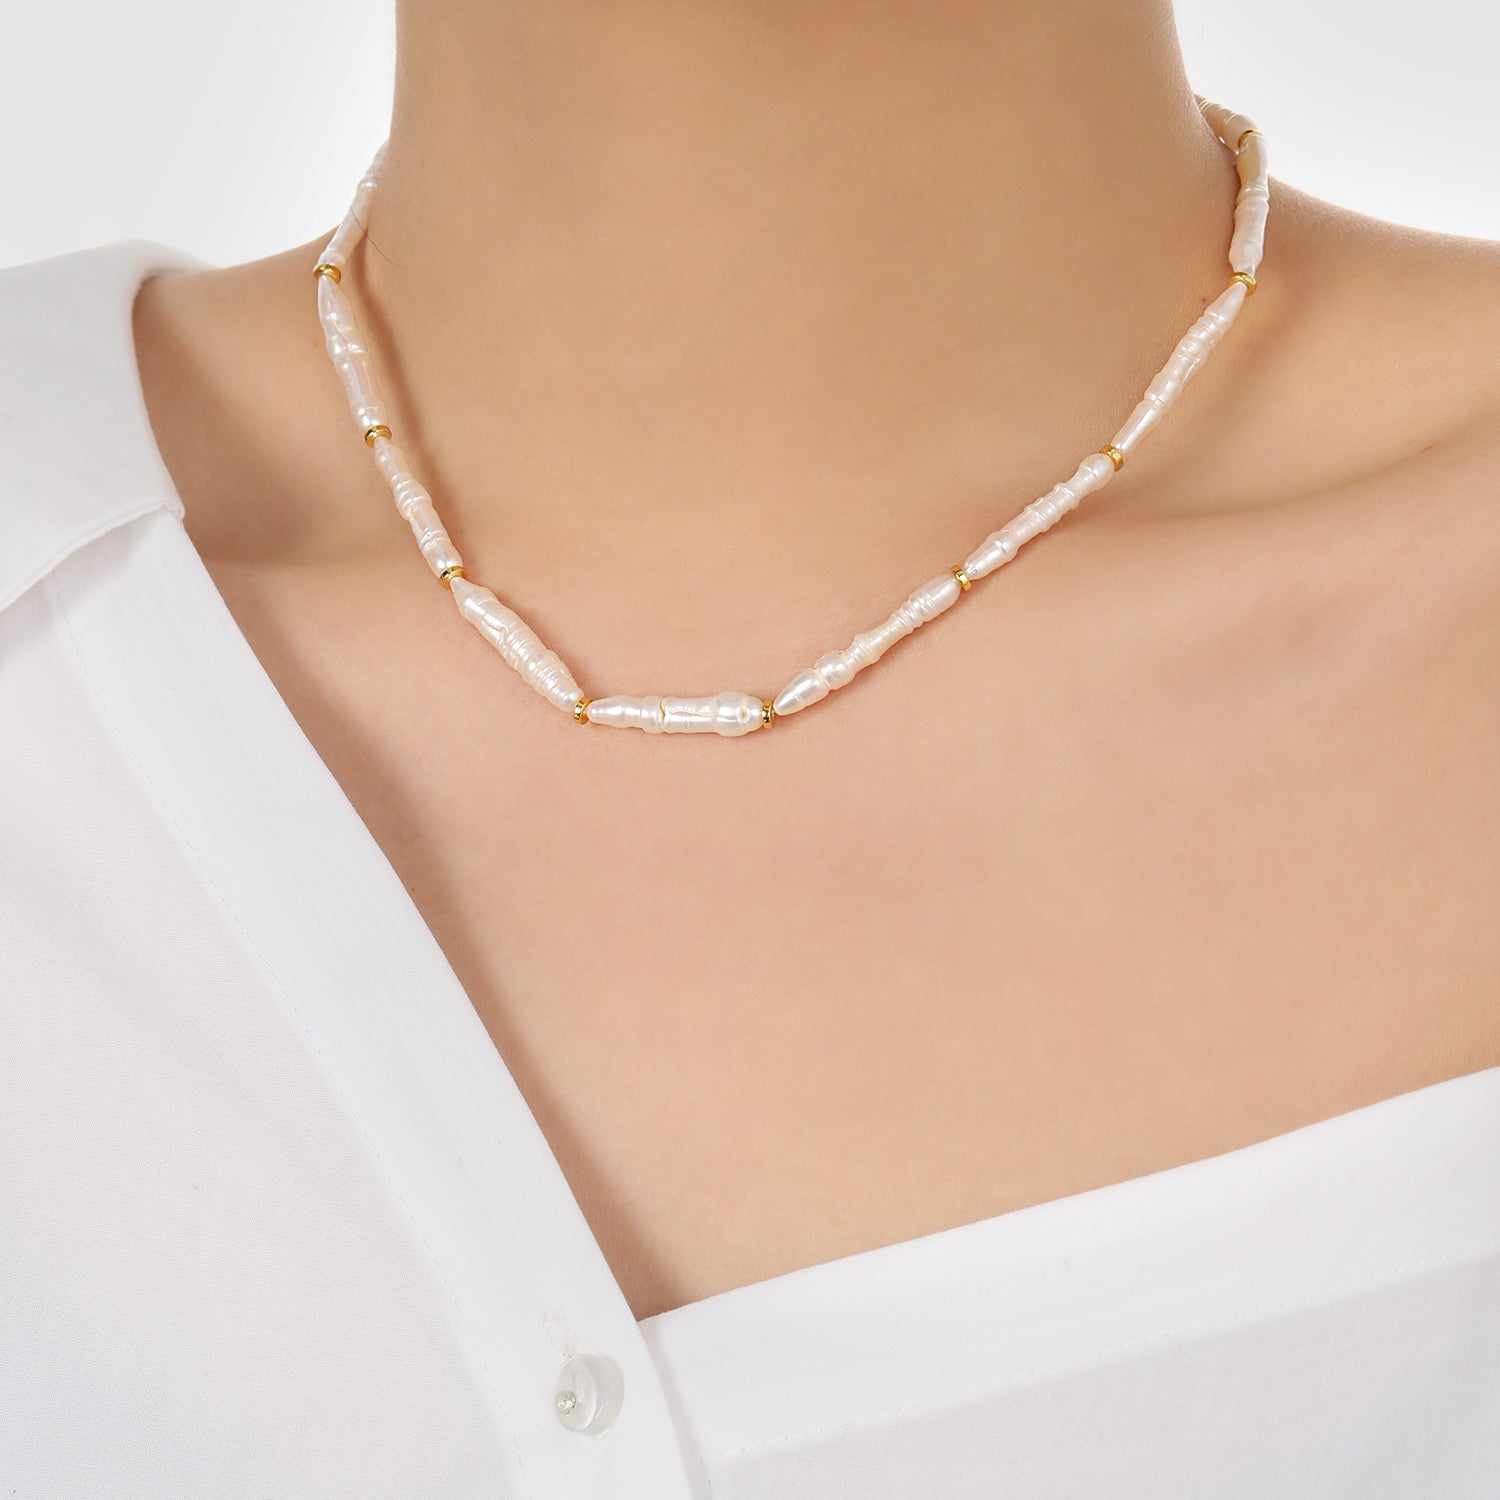 Long Stick Pearls Necklace | Mili